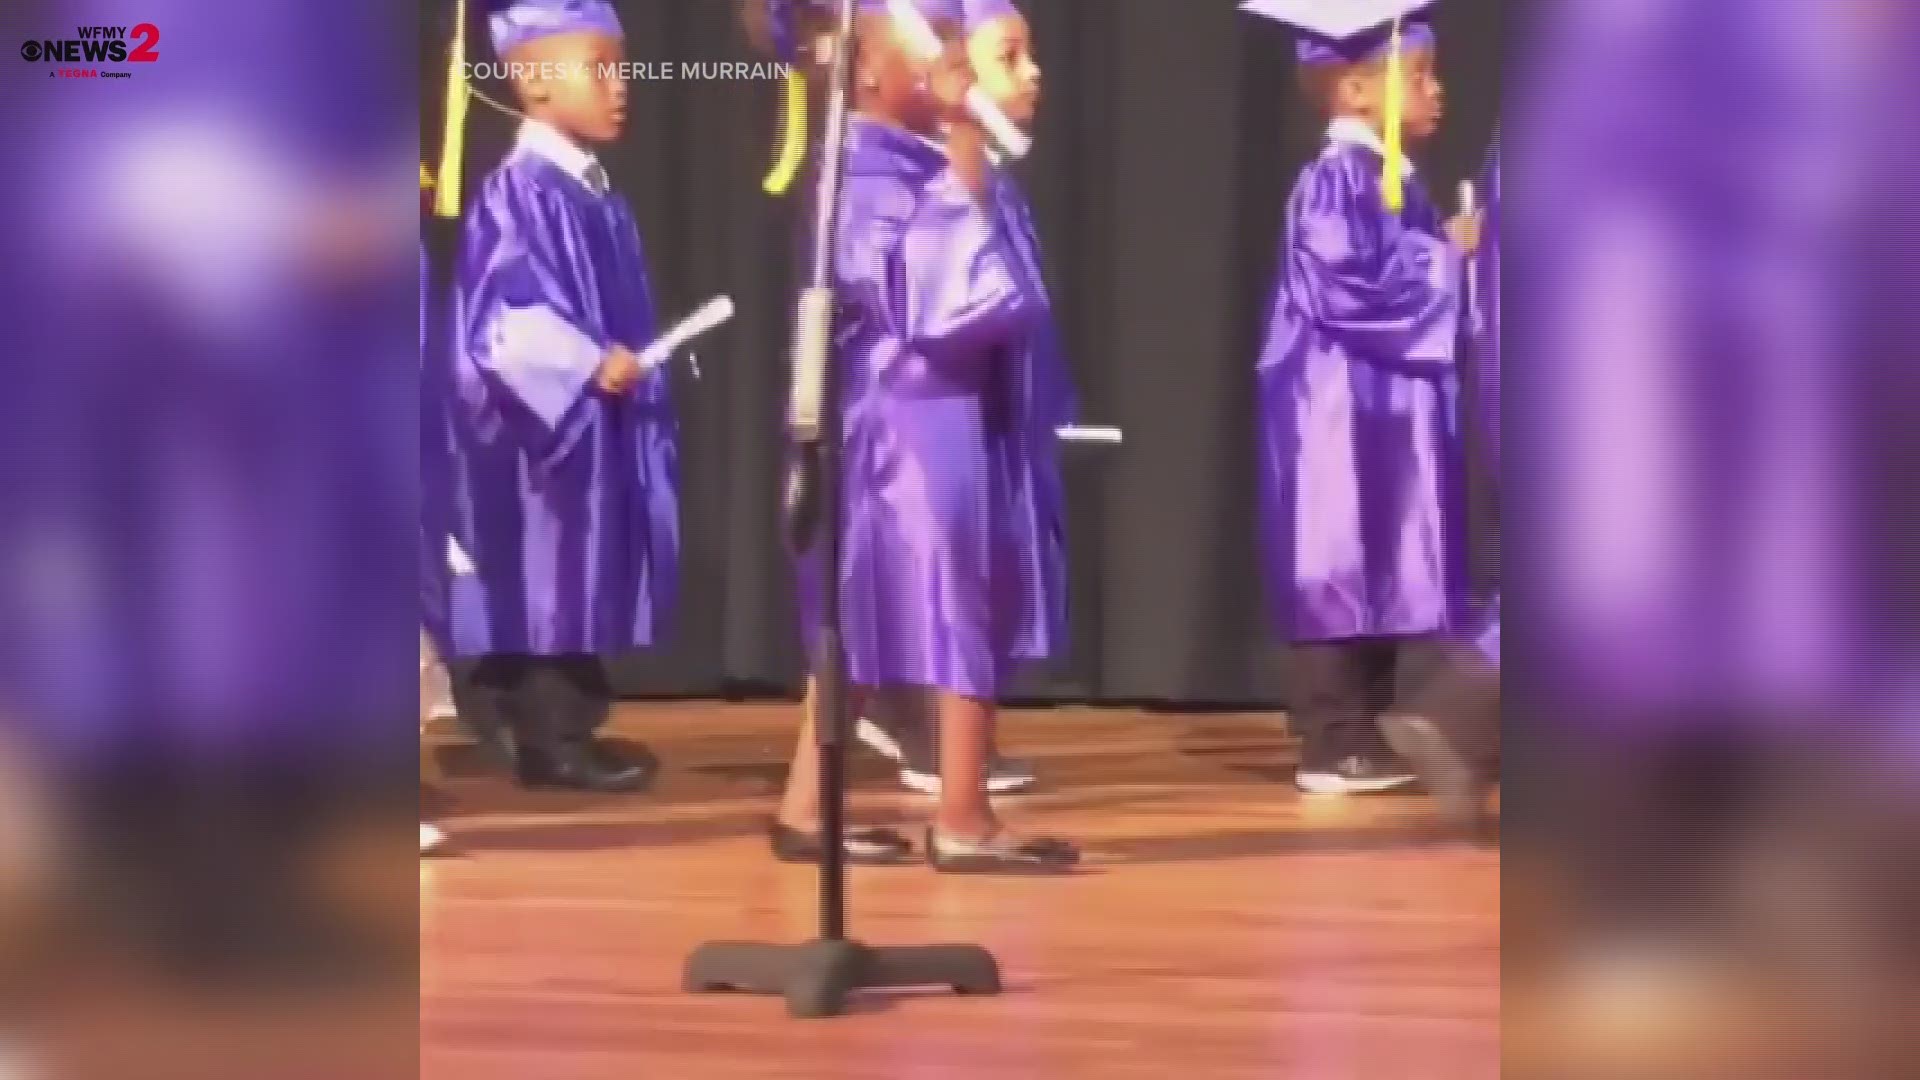 Aubrey Christina Toby definitely 'couldn't stop the feeling' during her graduation ceremony and her family caught it all on video. Courtesy: Merle Murrain